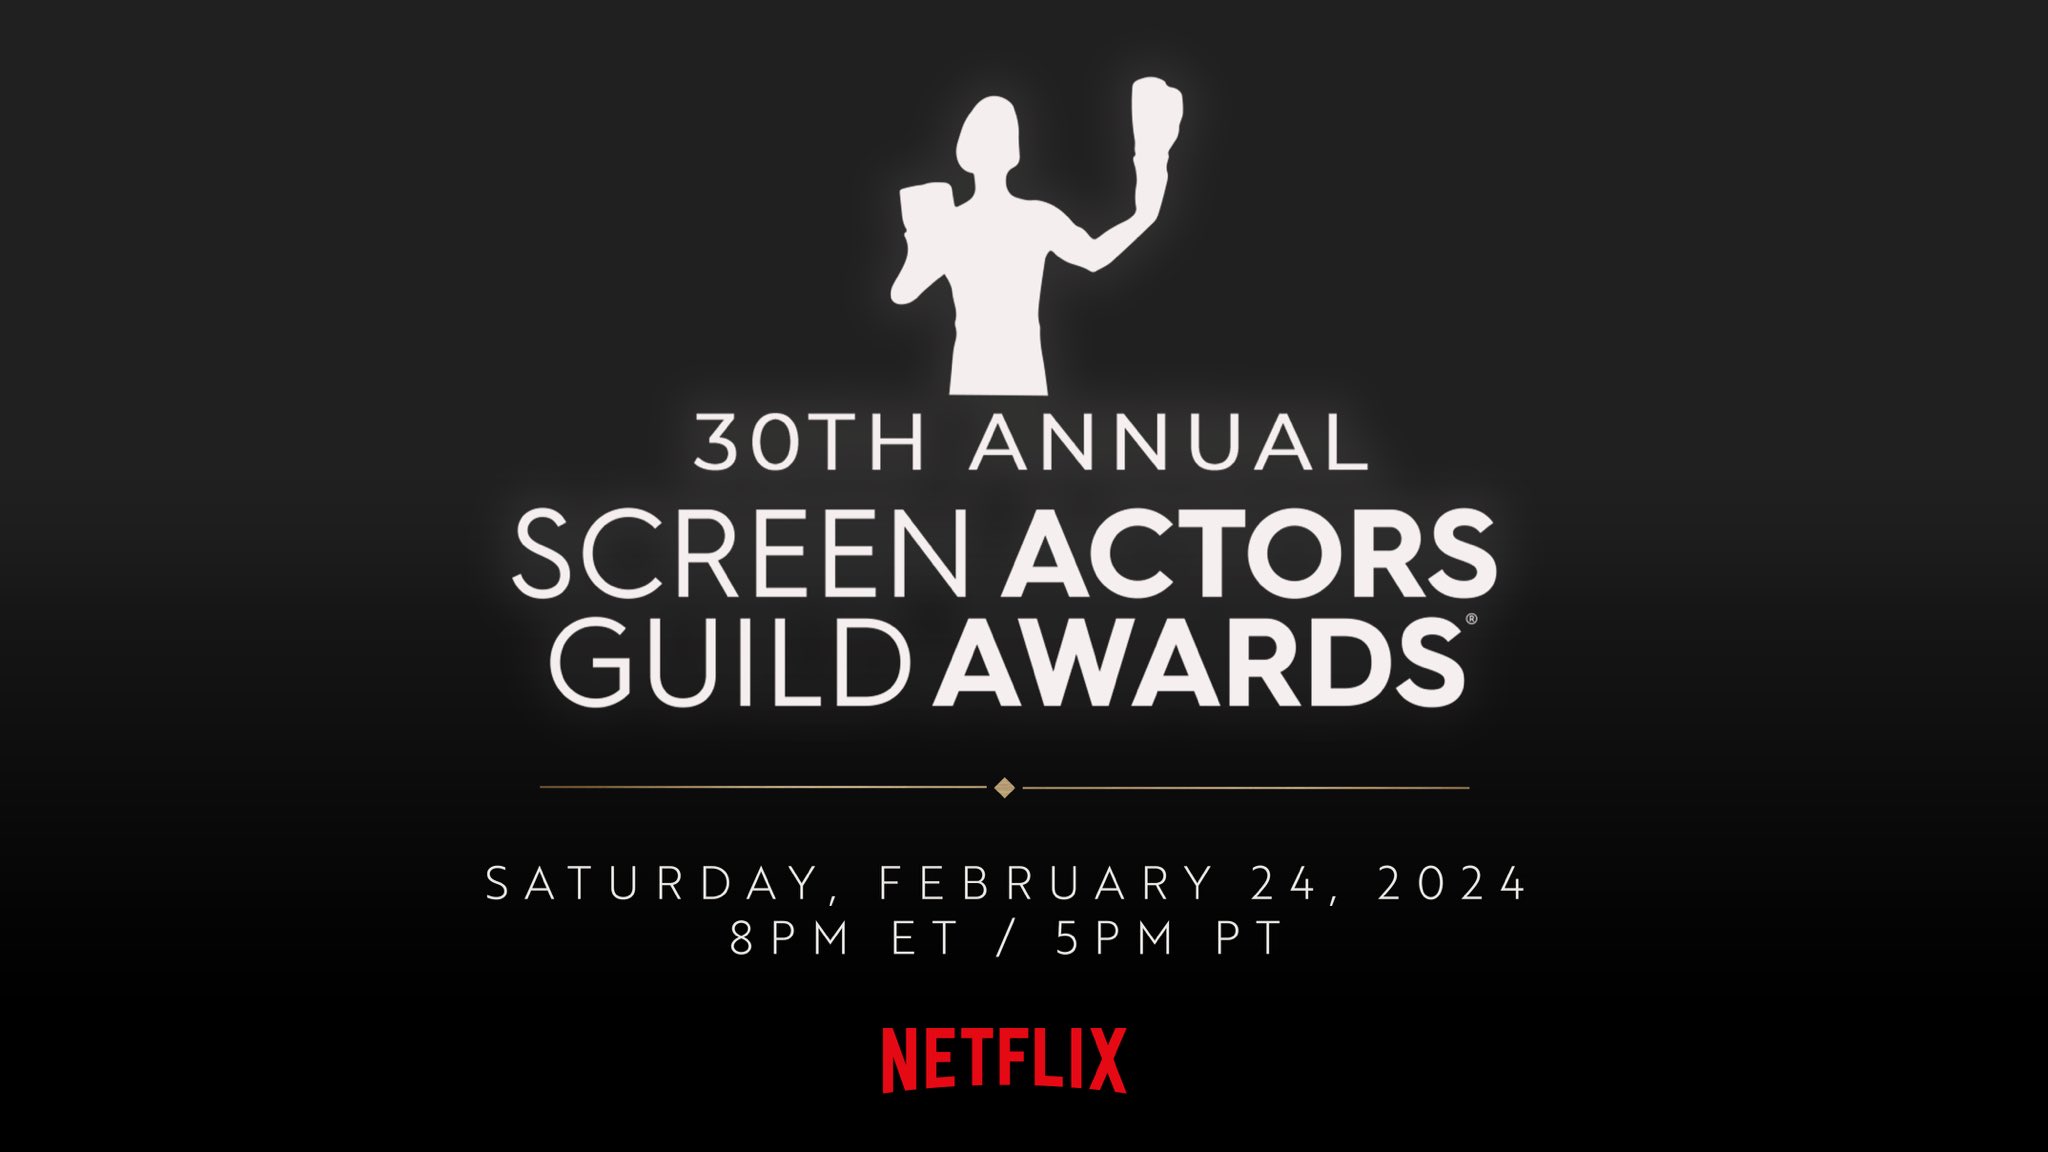 The 30th Annual Screen Actors Guild Awards, honoring the best achievements in film and television performances for the year 2023, will be presented on February 24, 2024, at the Shrine Auditorium and Expo Hall in Los Angeles, California. For the first time, the ceremony will stream live on Netflix, starting at 8:00 p.m. EST / 5:00 p.m. PST. The nominees were announced on January 10, 2024, by Kumail Nanjiani and Issa Rae via the SAG Awards' and Netflix's Instagram Live. It will be produced for the first time by Silent House Productions, with Alex Rudzinski serving as director. Before the nominations announcement, Entertainment Weekly and the Screen Actors Guild co-hosted the inaugural SAG Awards Season Celebration, presented by City National Bank, on December 14, 2023, in Los Angeles. Barbra Streisand was announced as the 2023 SAG Life Achievement Award recipient on December 14, 2023.